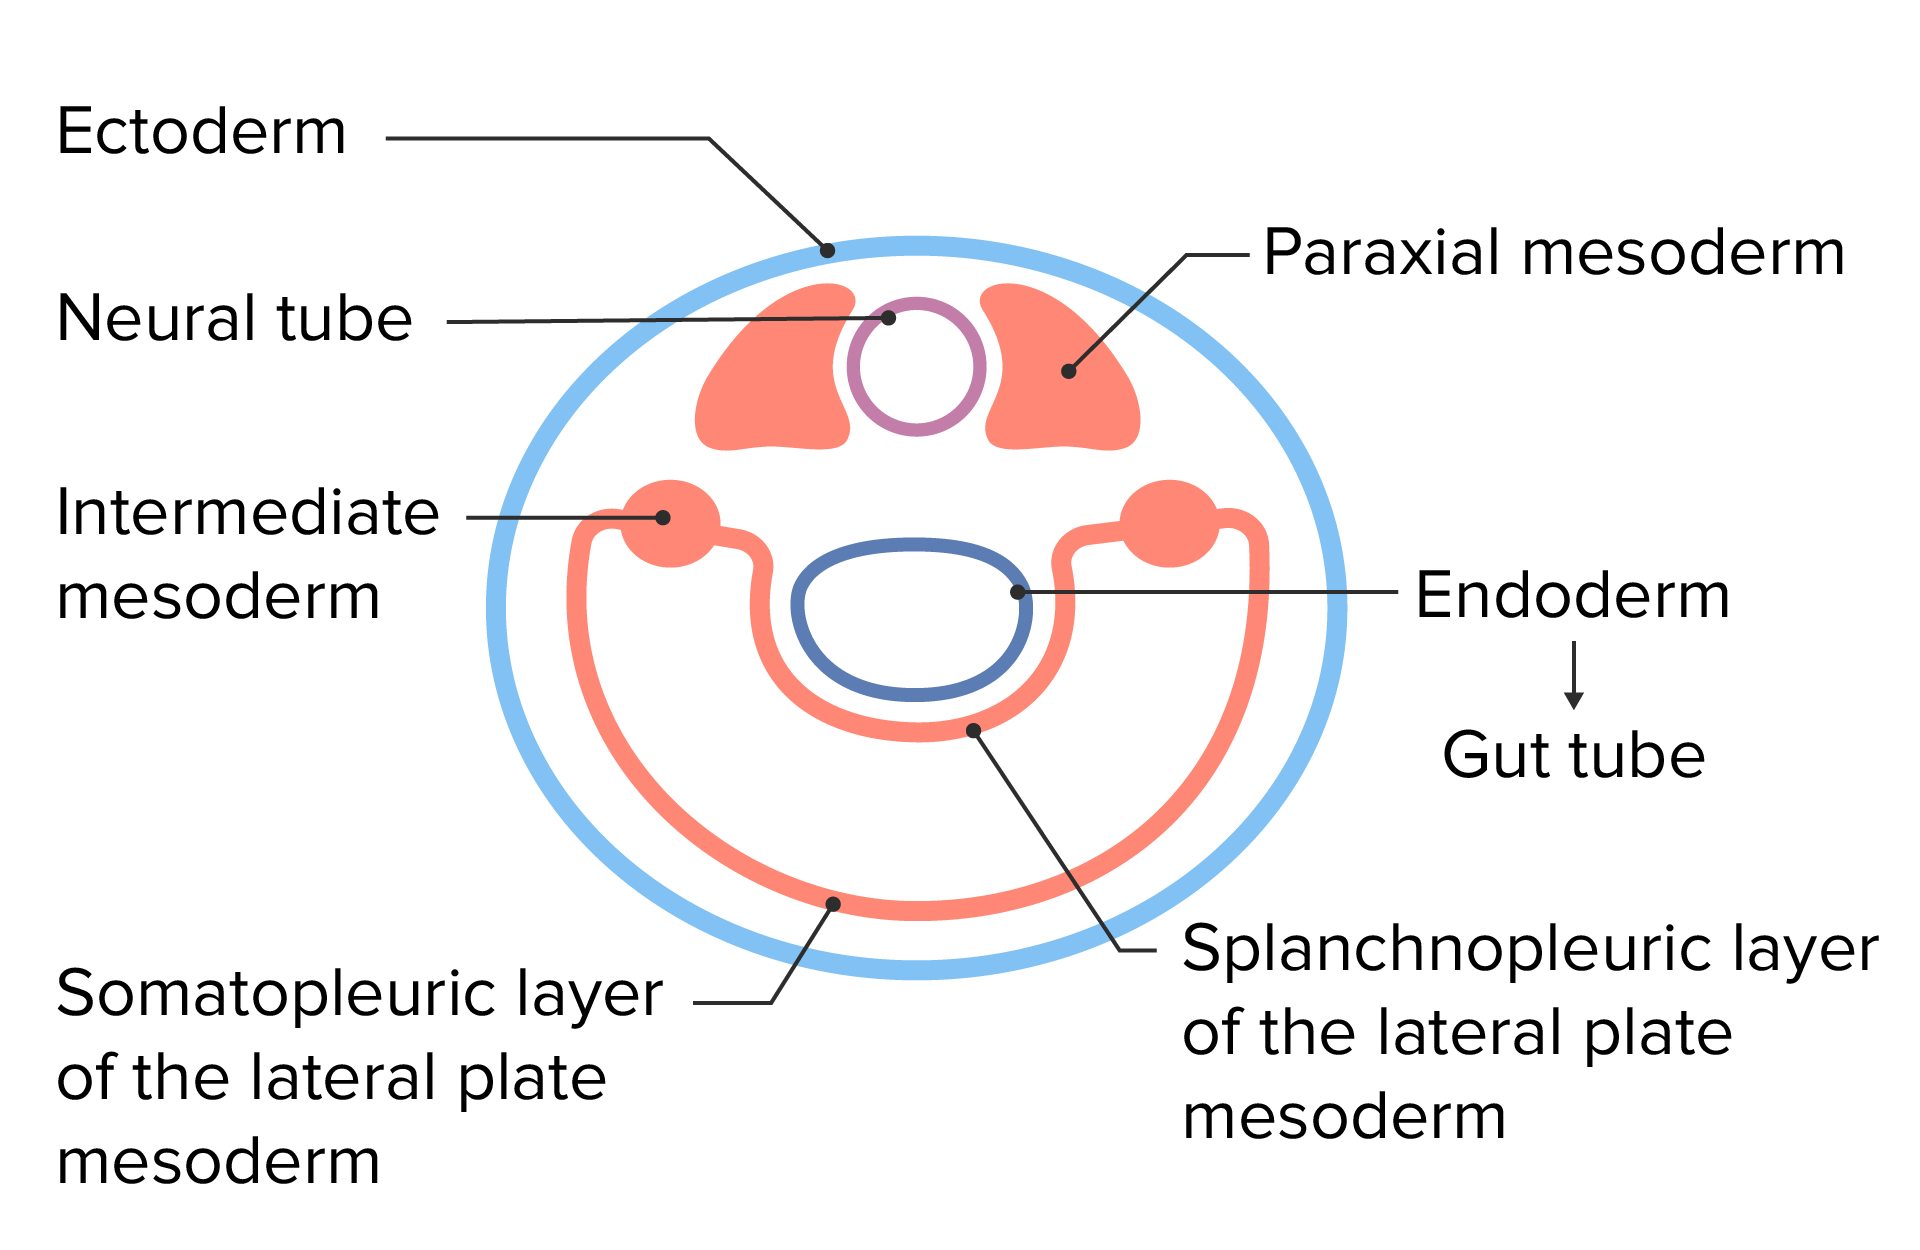 Embryonic cell layers following lateral folding of the trilaminar disc